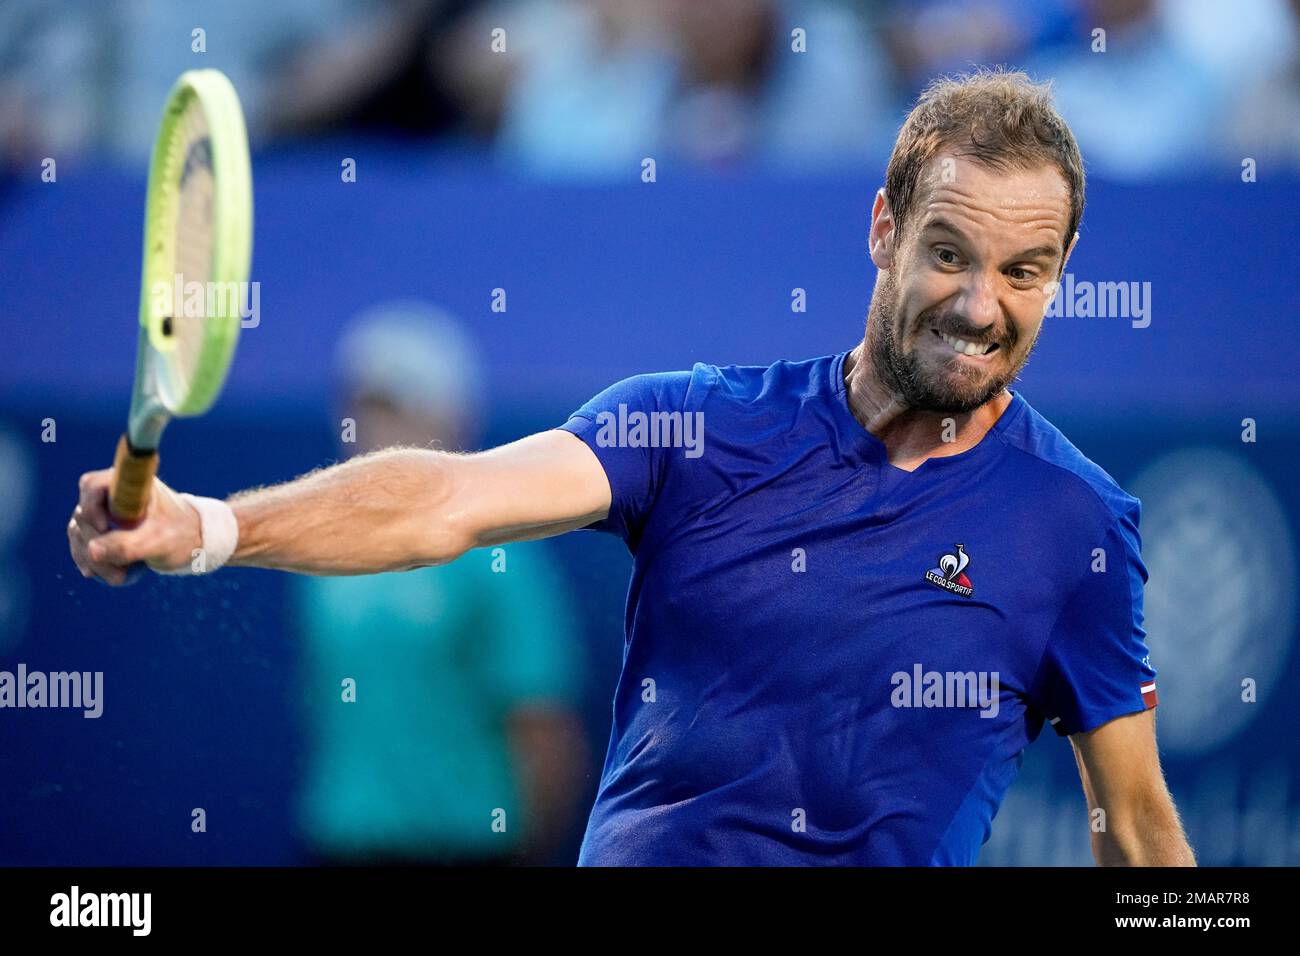 Richard Gasquet, of France, plays against Laslo Djere, of Serbia, during  the Winston-Salem Open tennis tournament on Thursday, Aug. 25, 2022, in  Winston-Salem, N.C. (AP Photo/Chris Carlson Stock Photo - Alamy